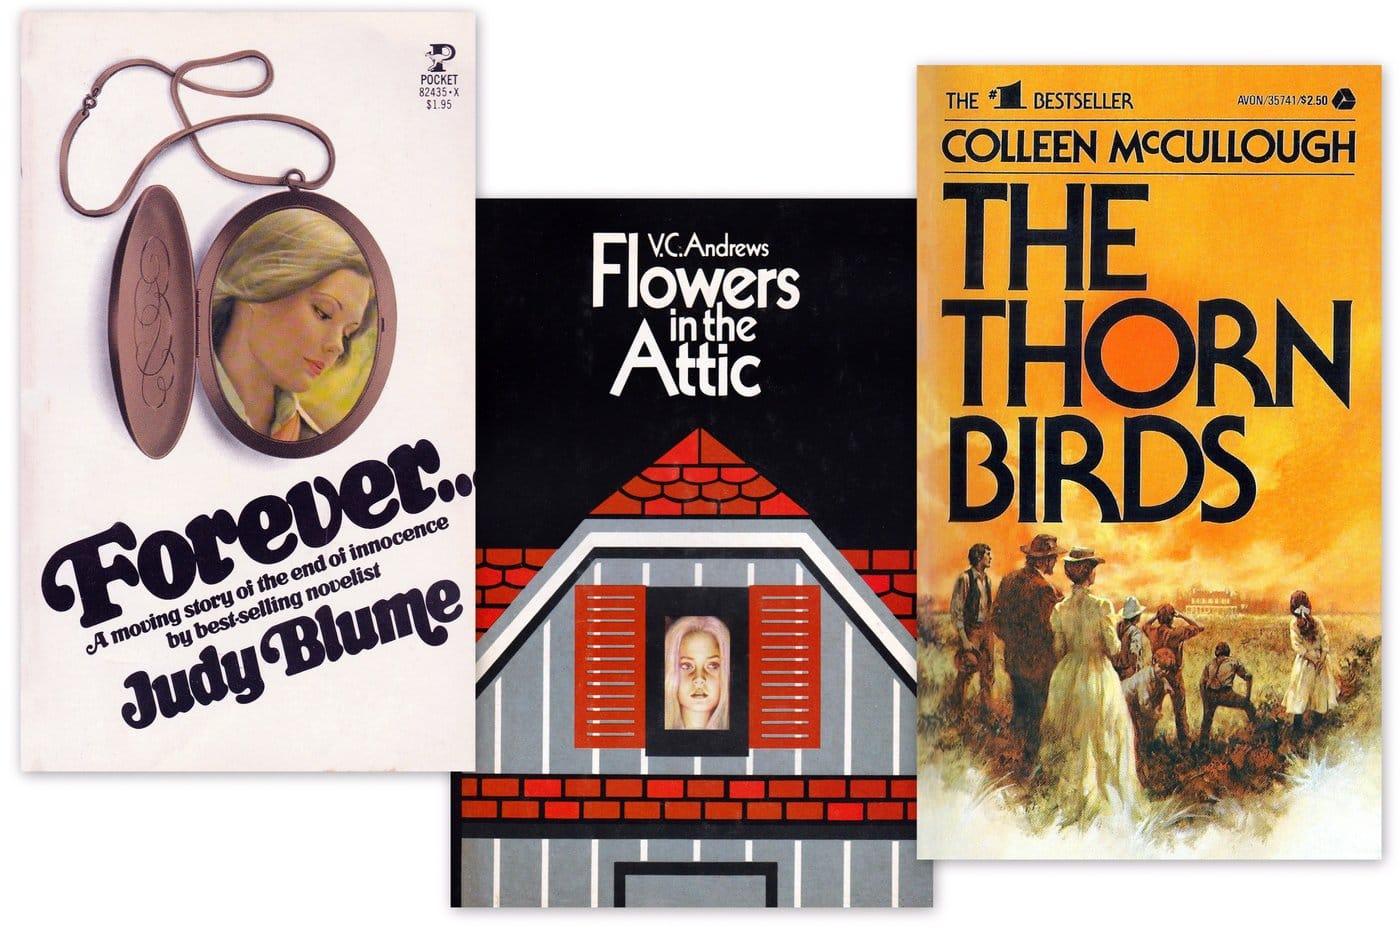 Vintage paperbacks - Forever - Flowers in the Attic - The Thorn Birds